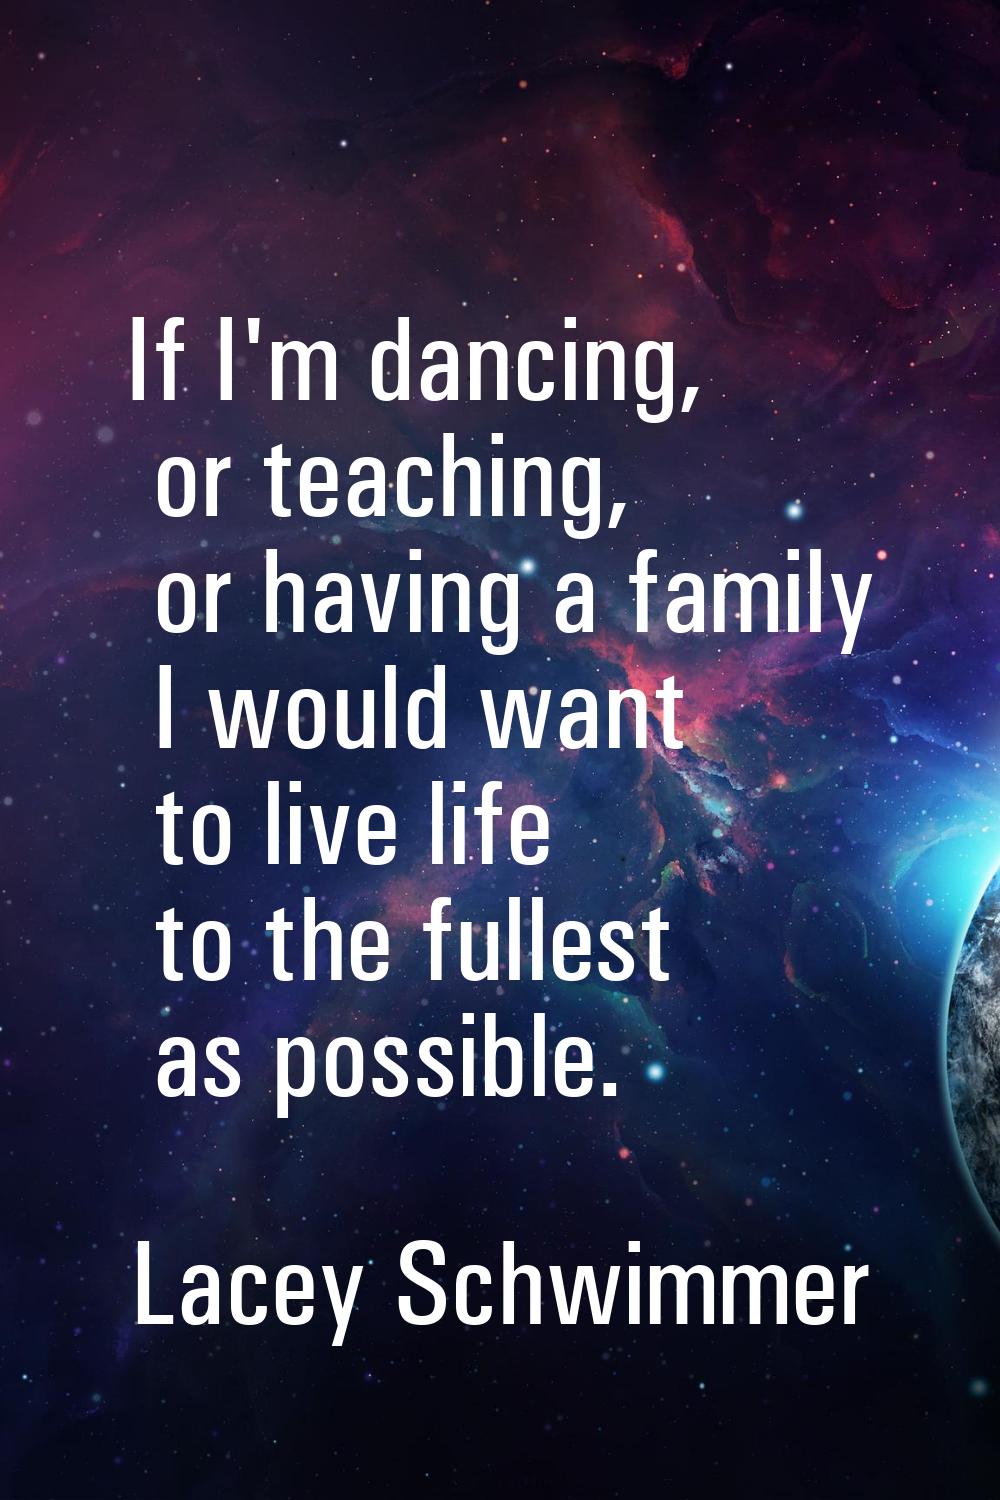 If I'm dancing, or teaching, or having a family I would want to live life to the fullest as possibl